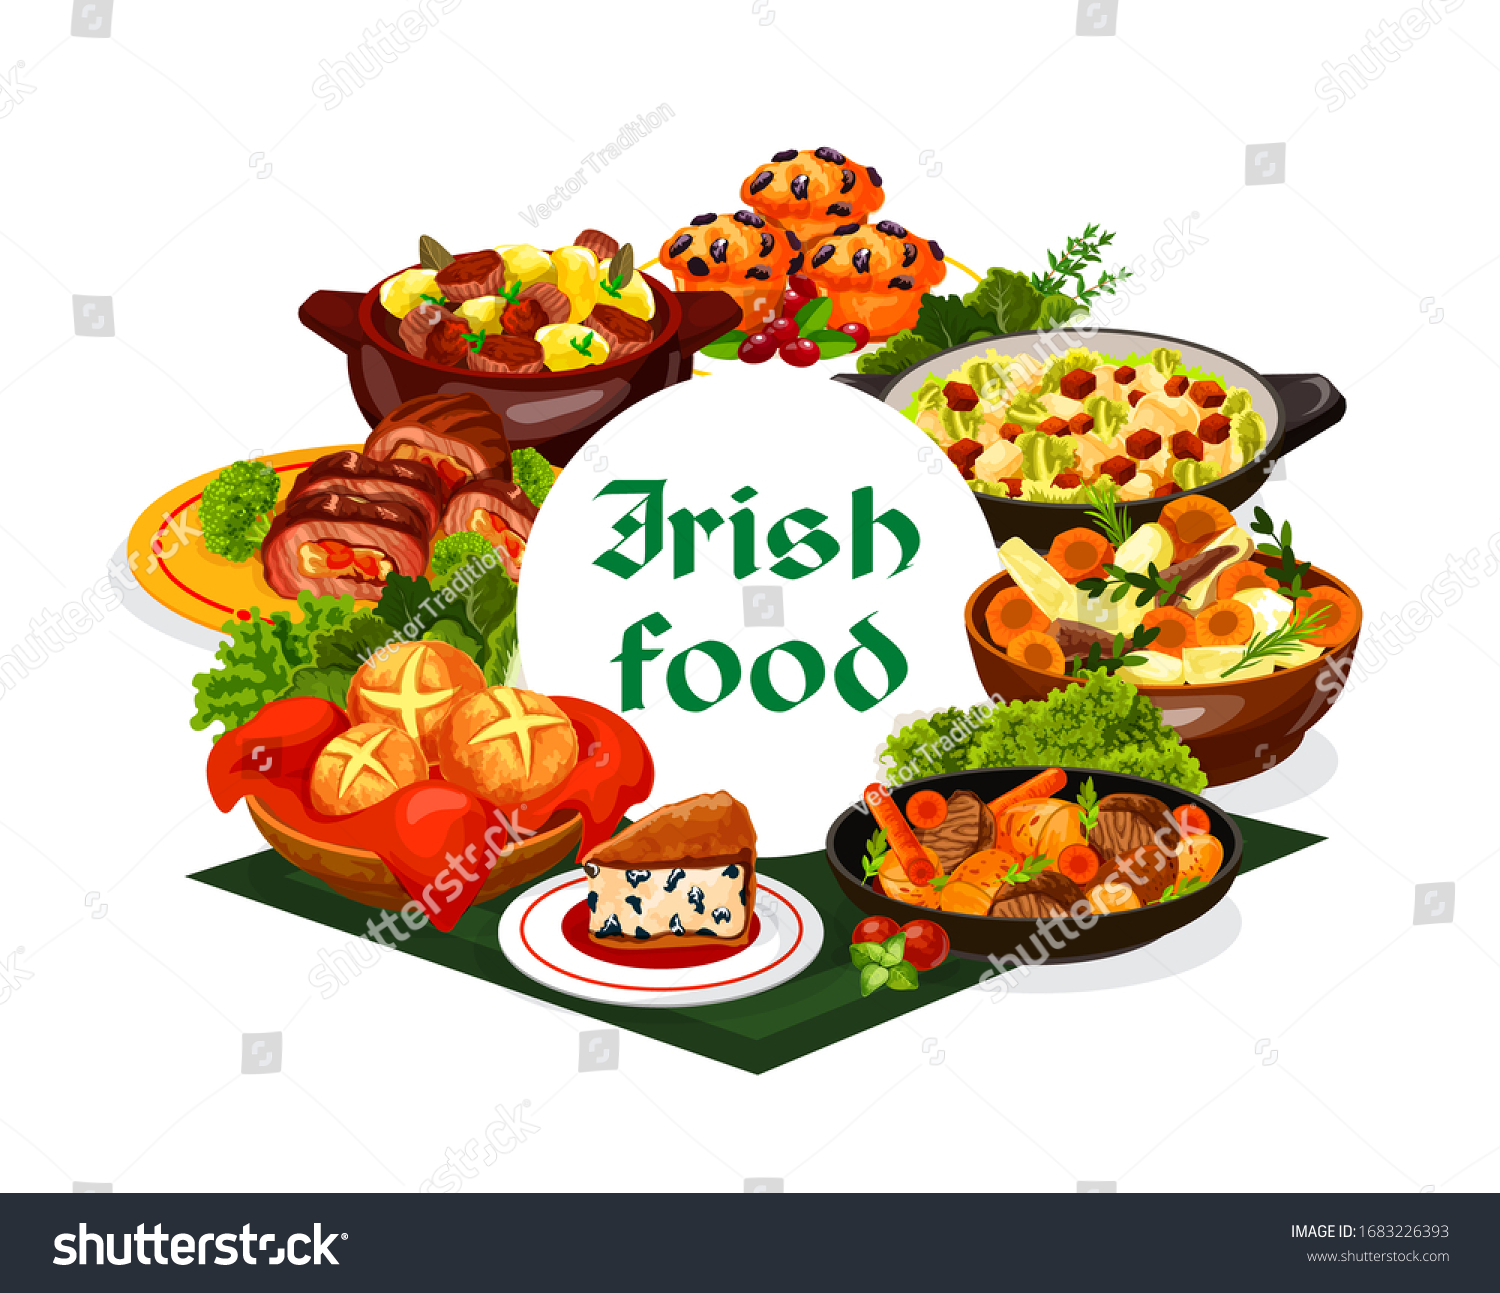 SVG of Irish cuisine food with vegetable meat stews and bread vector design. Mashed potato and cabbage colcannon, soda and raisins bread, baked beef rolls, lamb stew and lingonberry cupcakes, Ireland meal svg